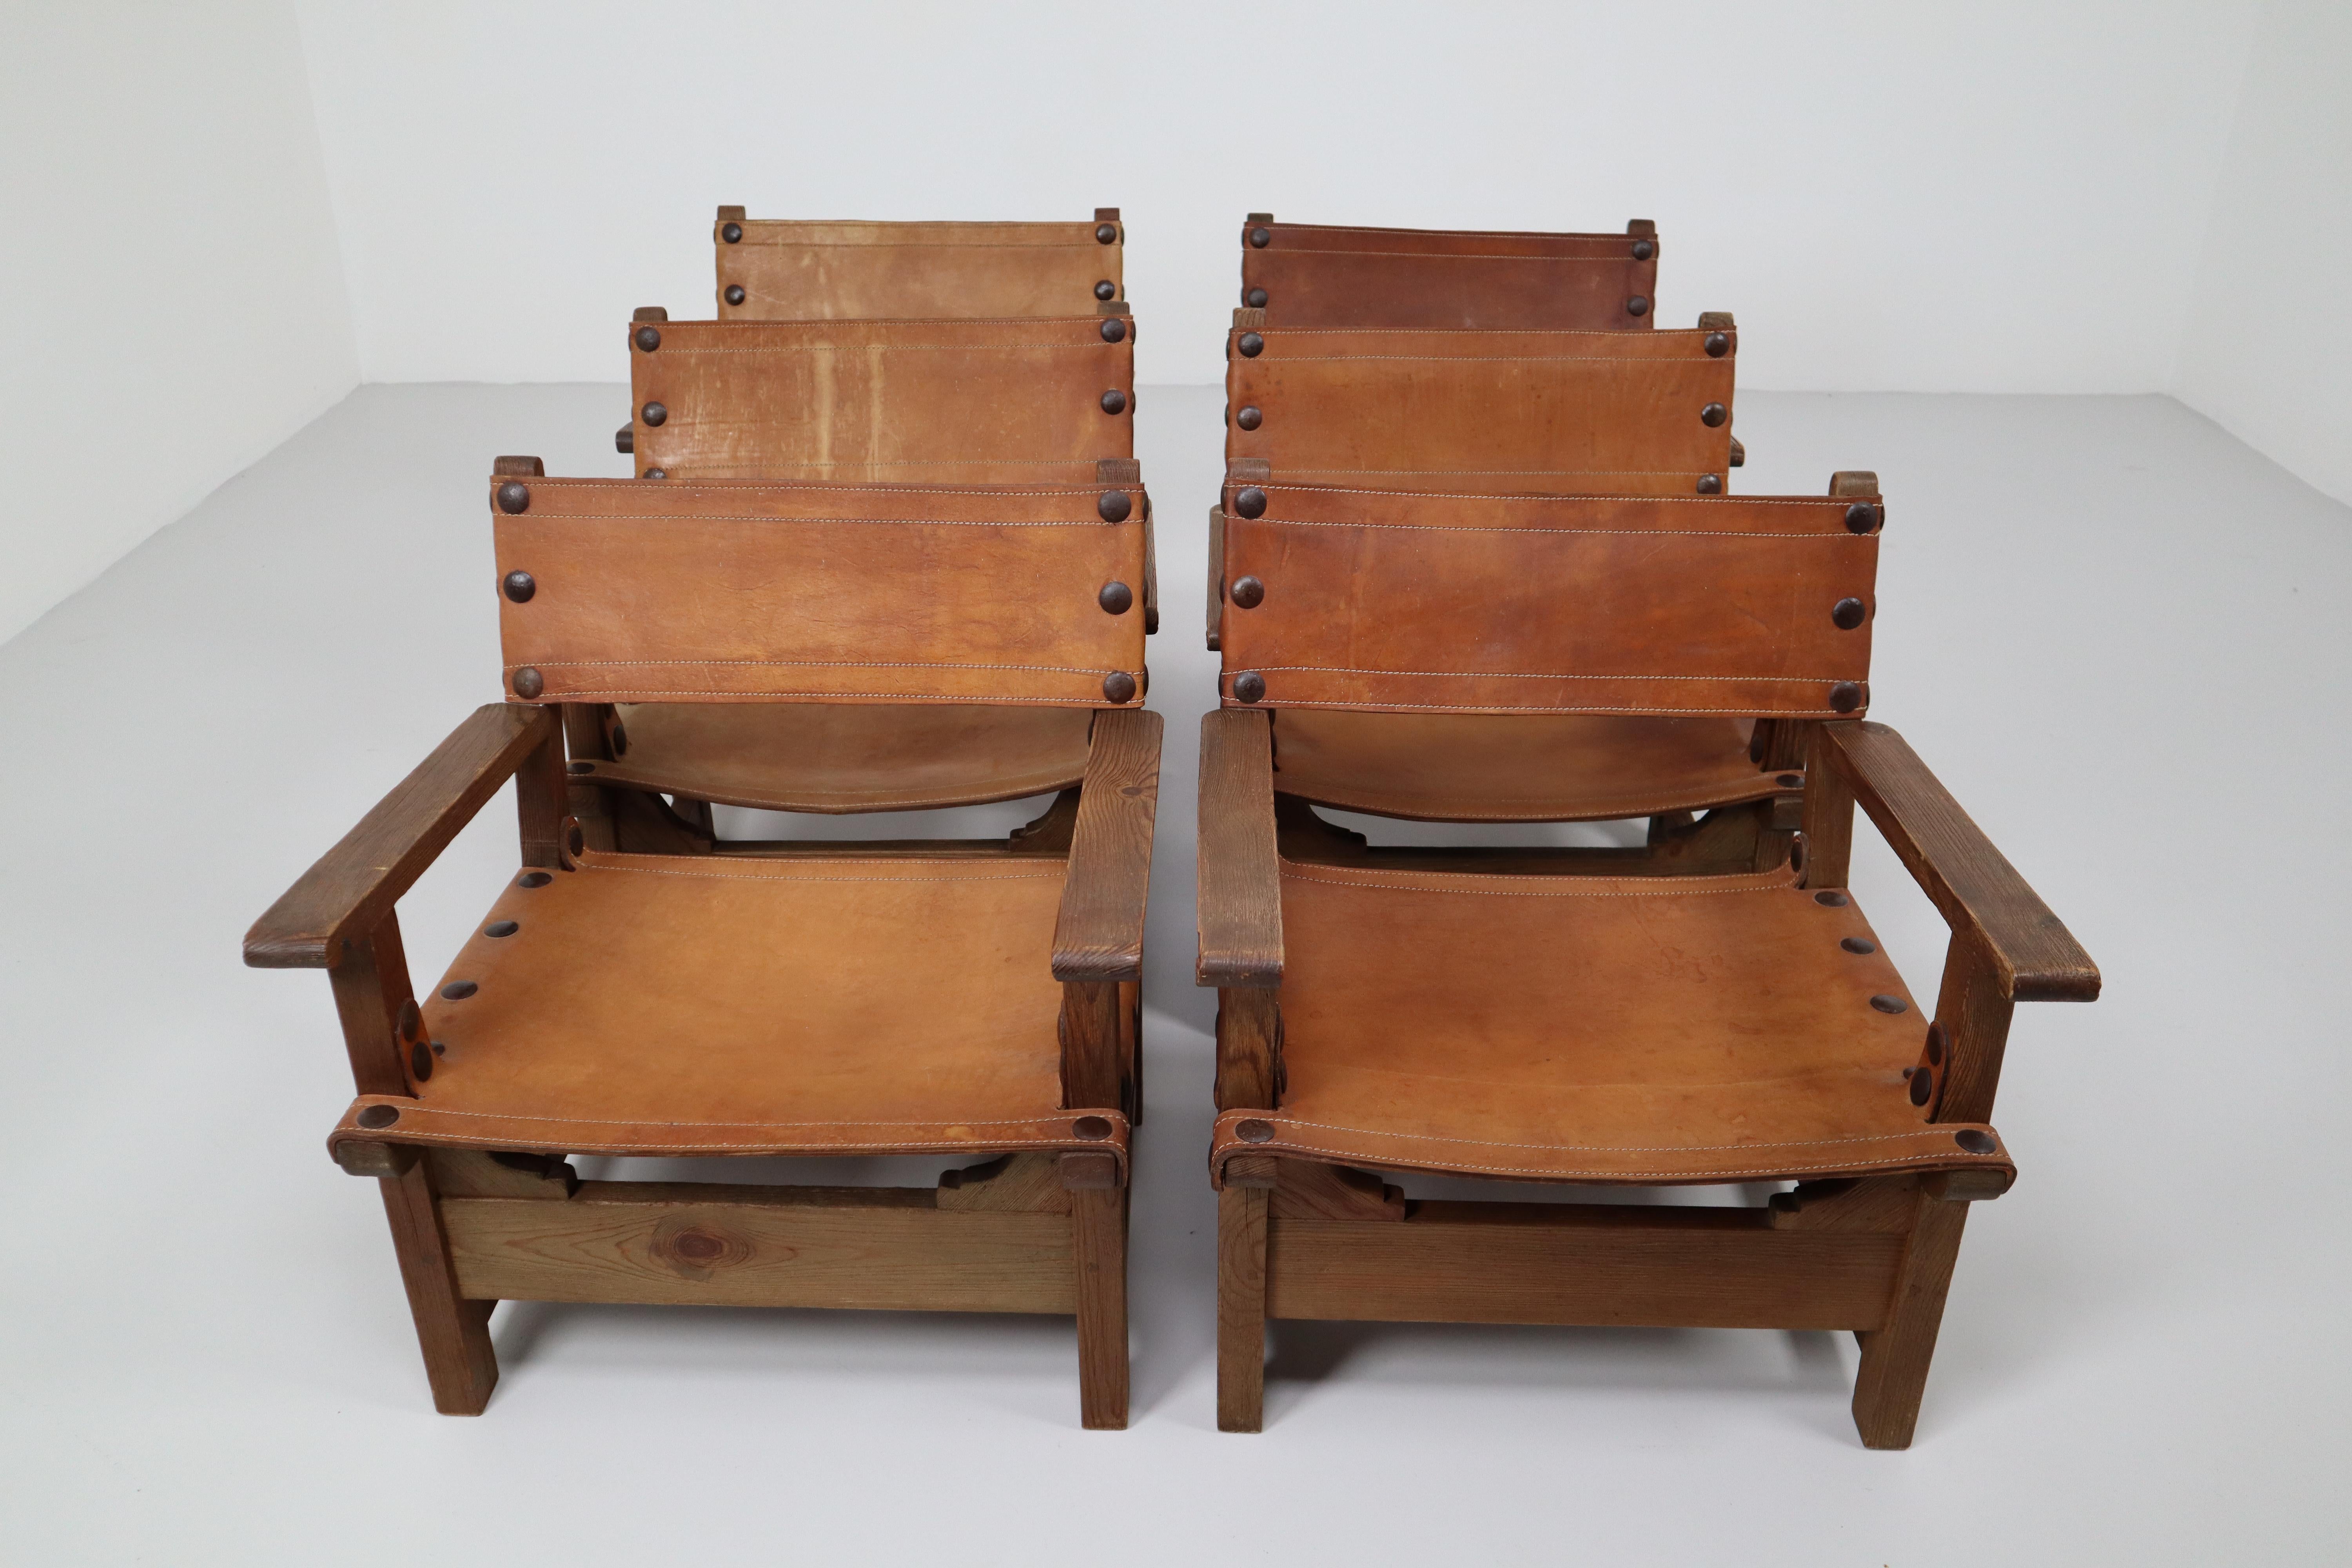 Six Midcentury French Lounge Chairs in Patinated Cognac Saddle Leather, 1950s (Französische Provence)